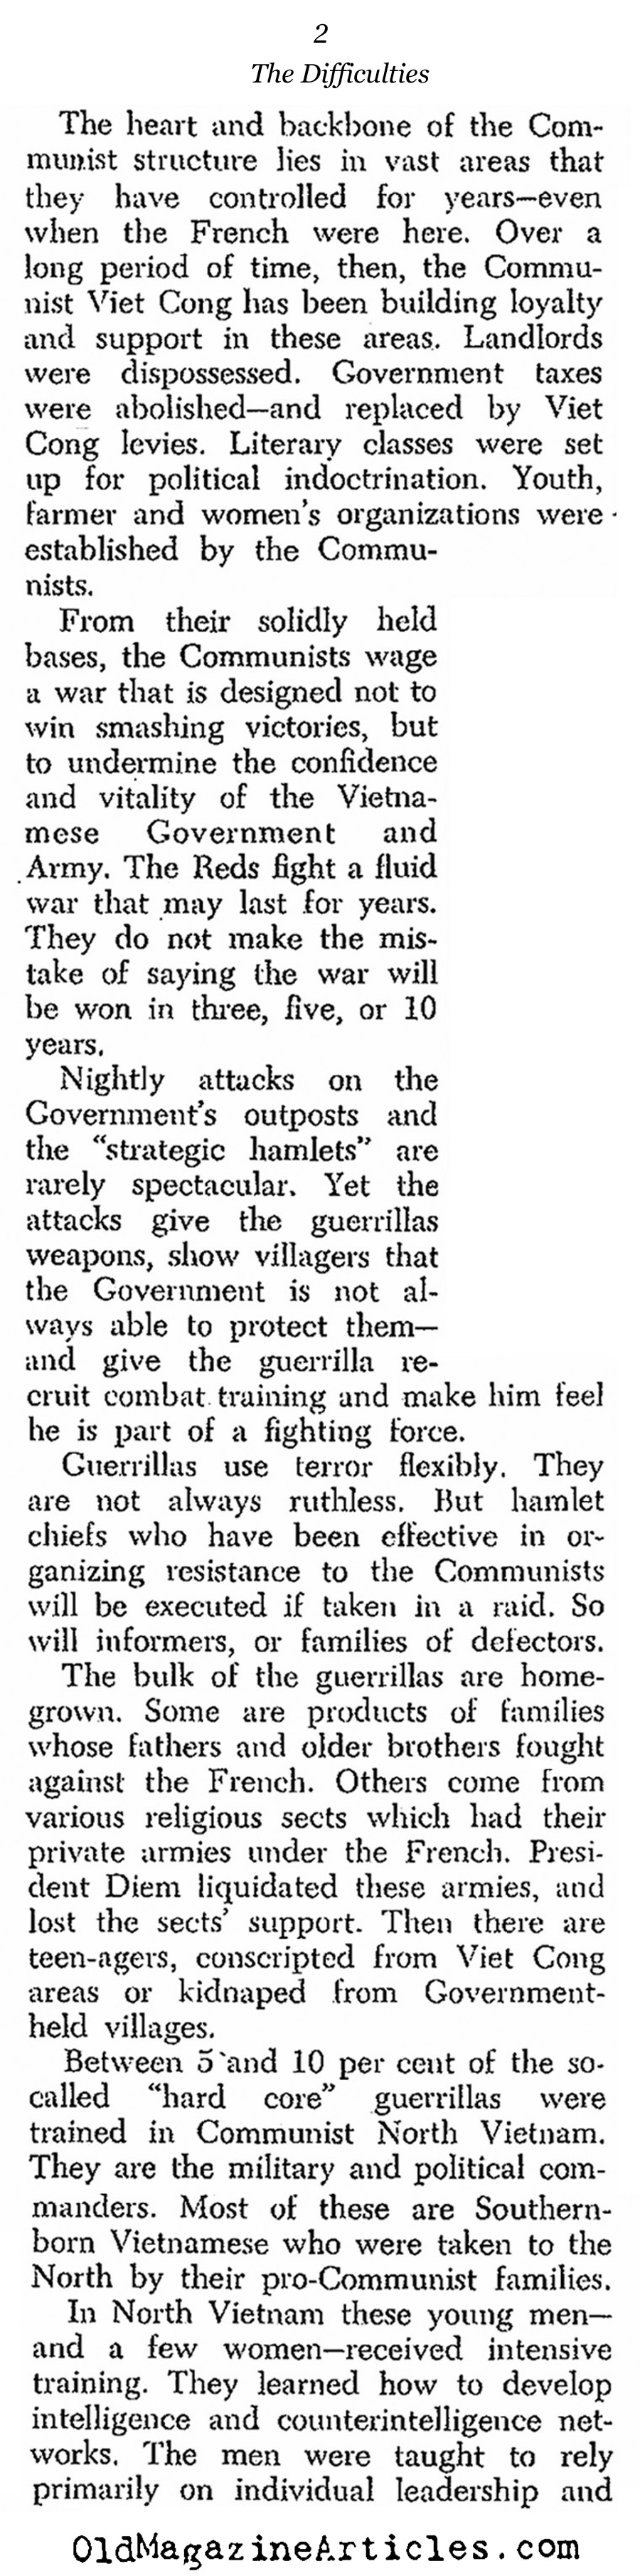 The Difficulties of This War (United States News, 1963)